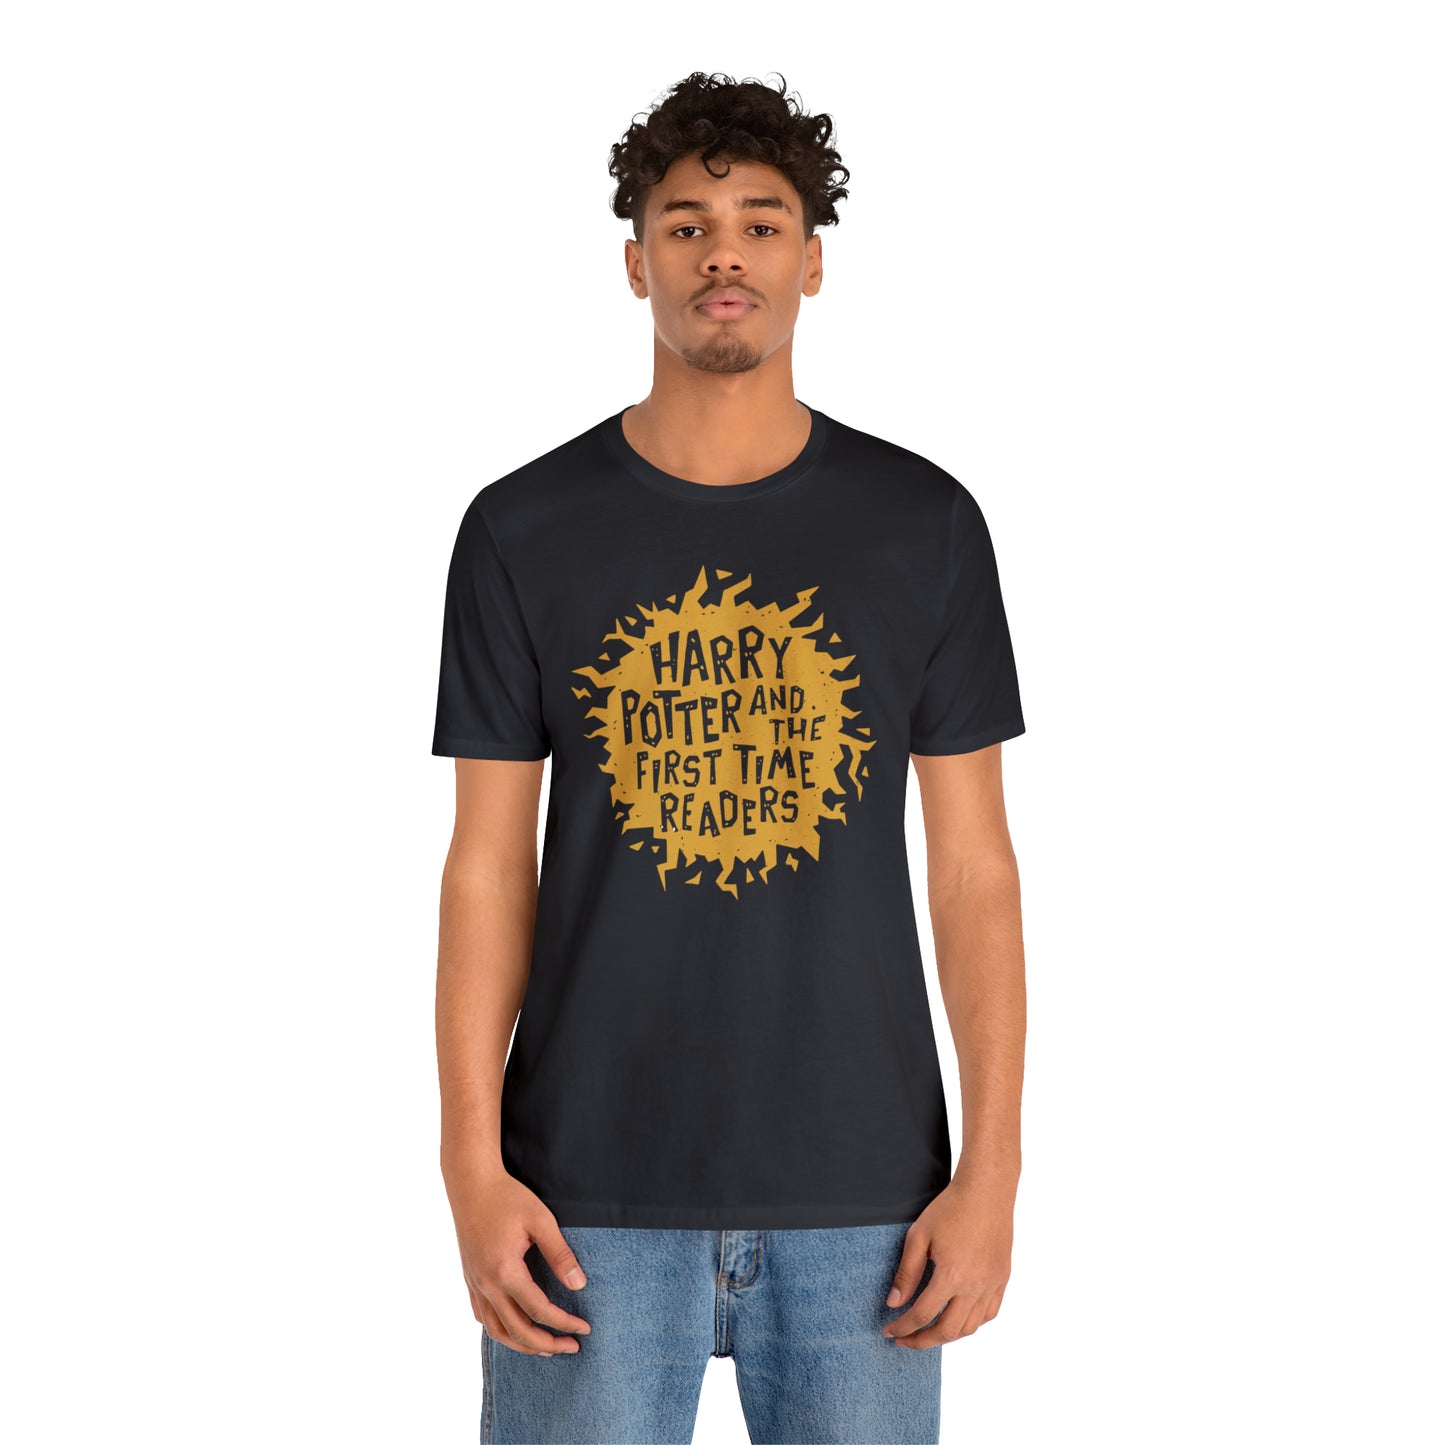 First Time Readers Short Sleeve Tee